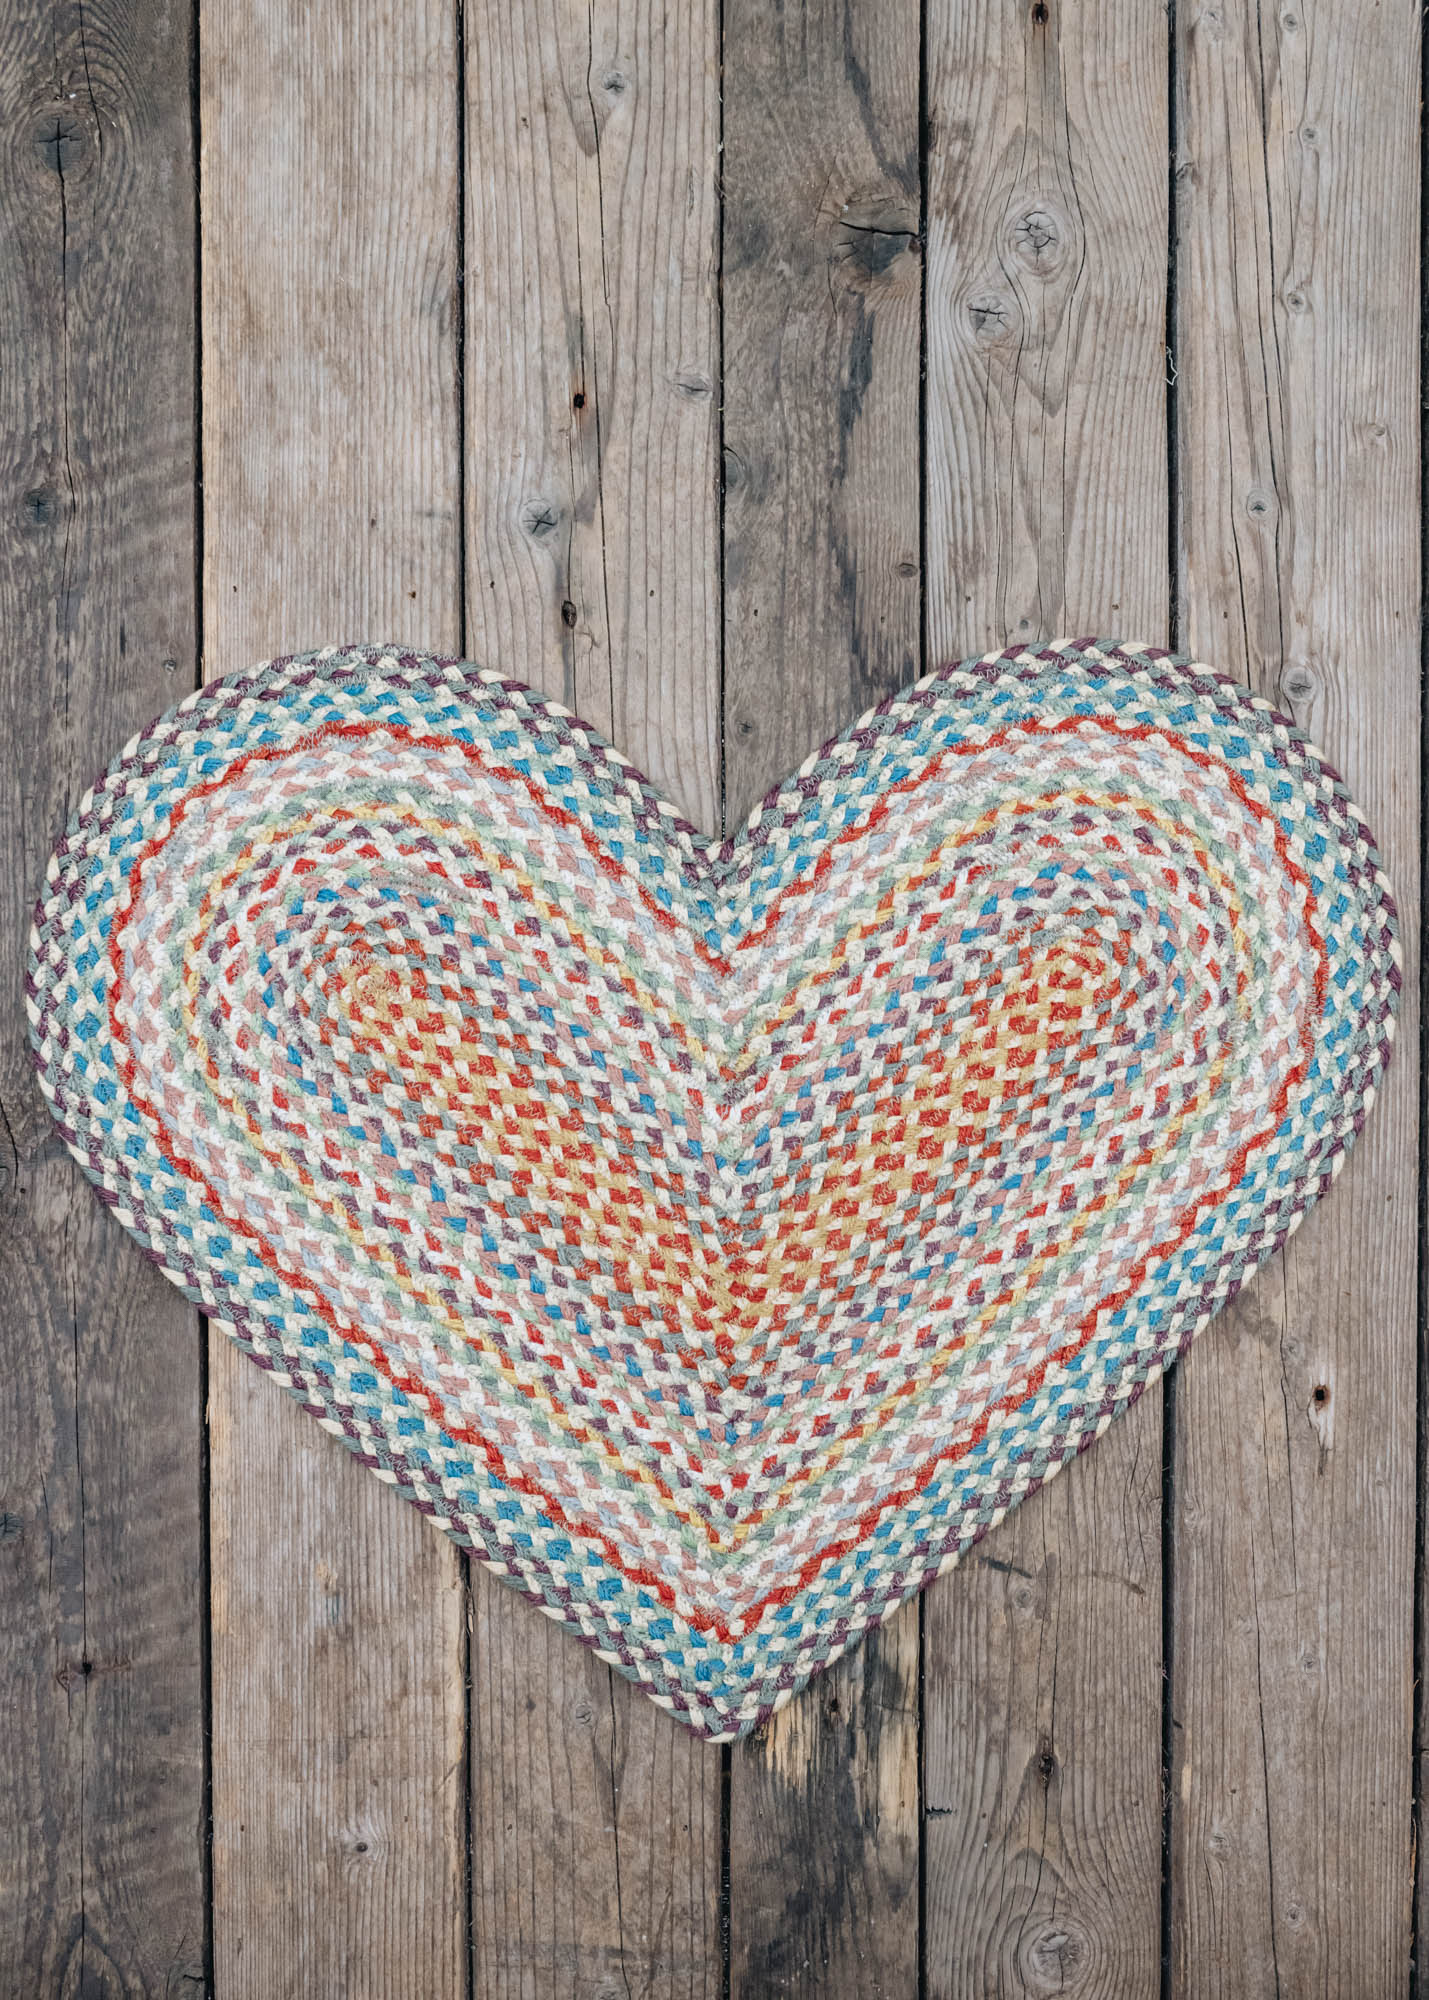 The Braided Rug Co. Heart Rug in Carnival